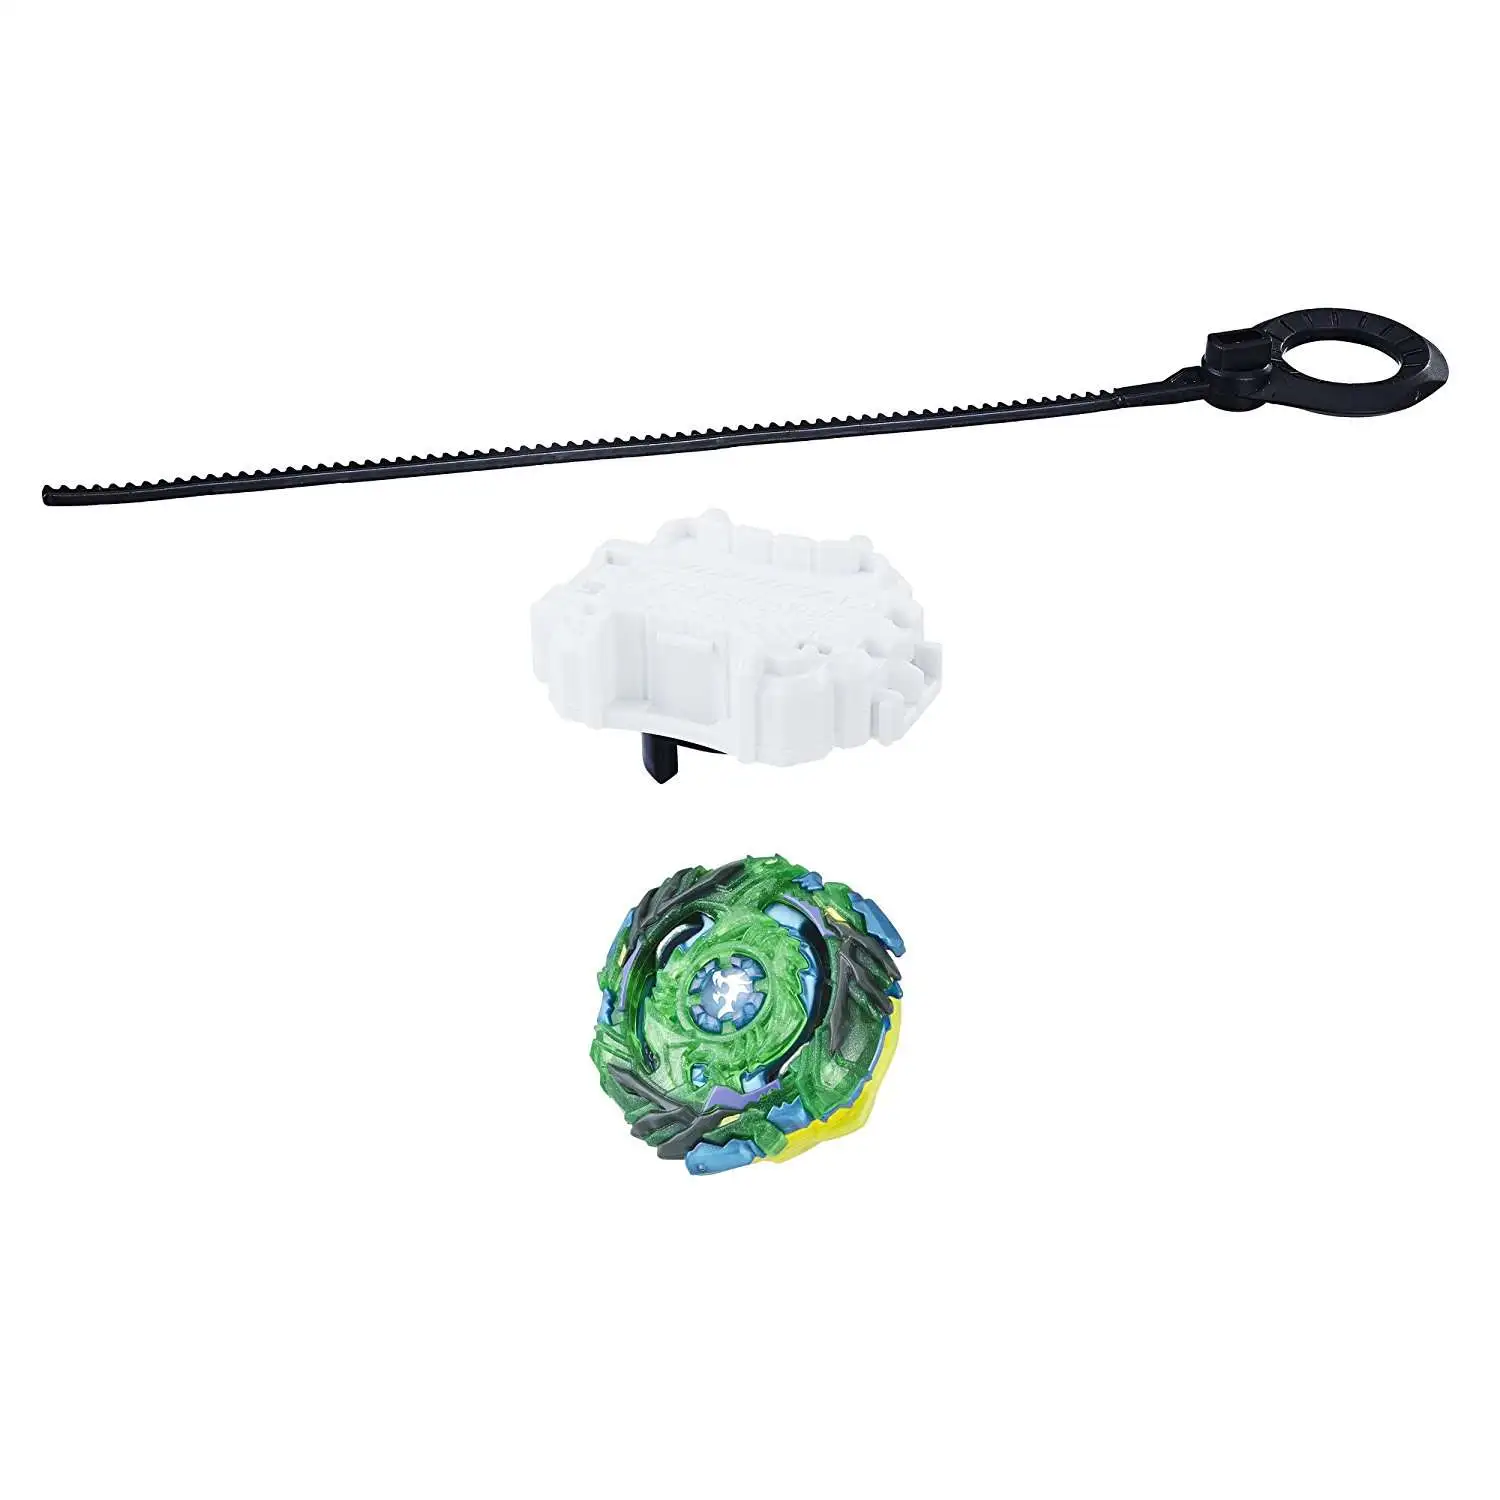 EXCLUSIVE REVEAL!! Using Fafnir F3 In BEYBLADE BURST RIVALS